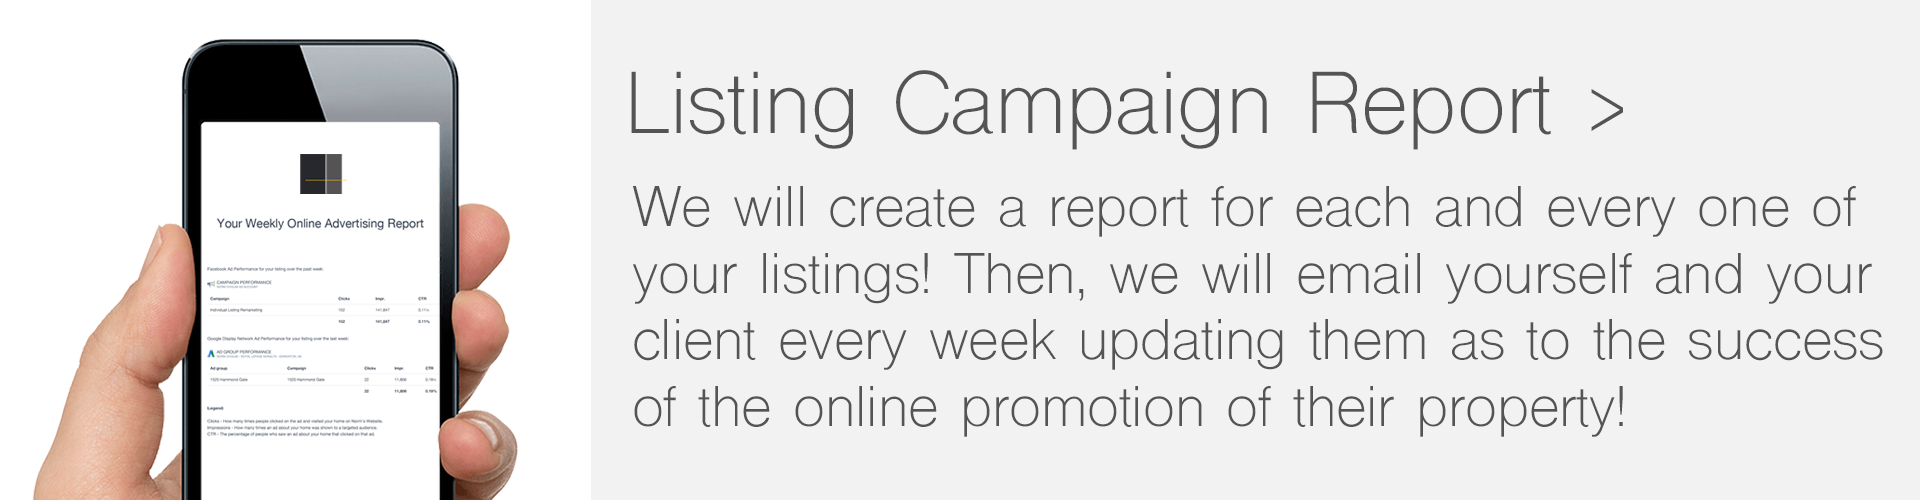 Listing-Campaign-Report-long